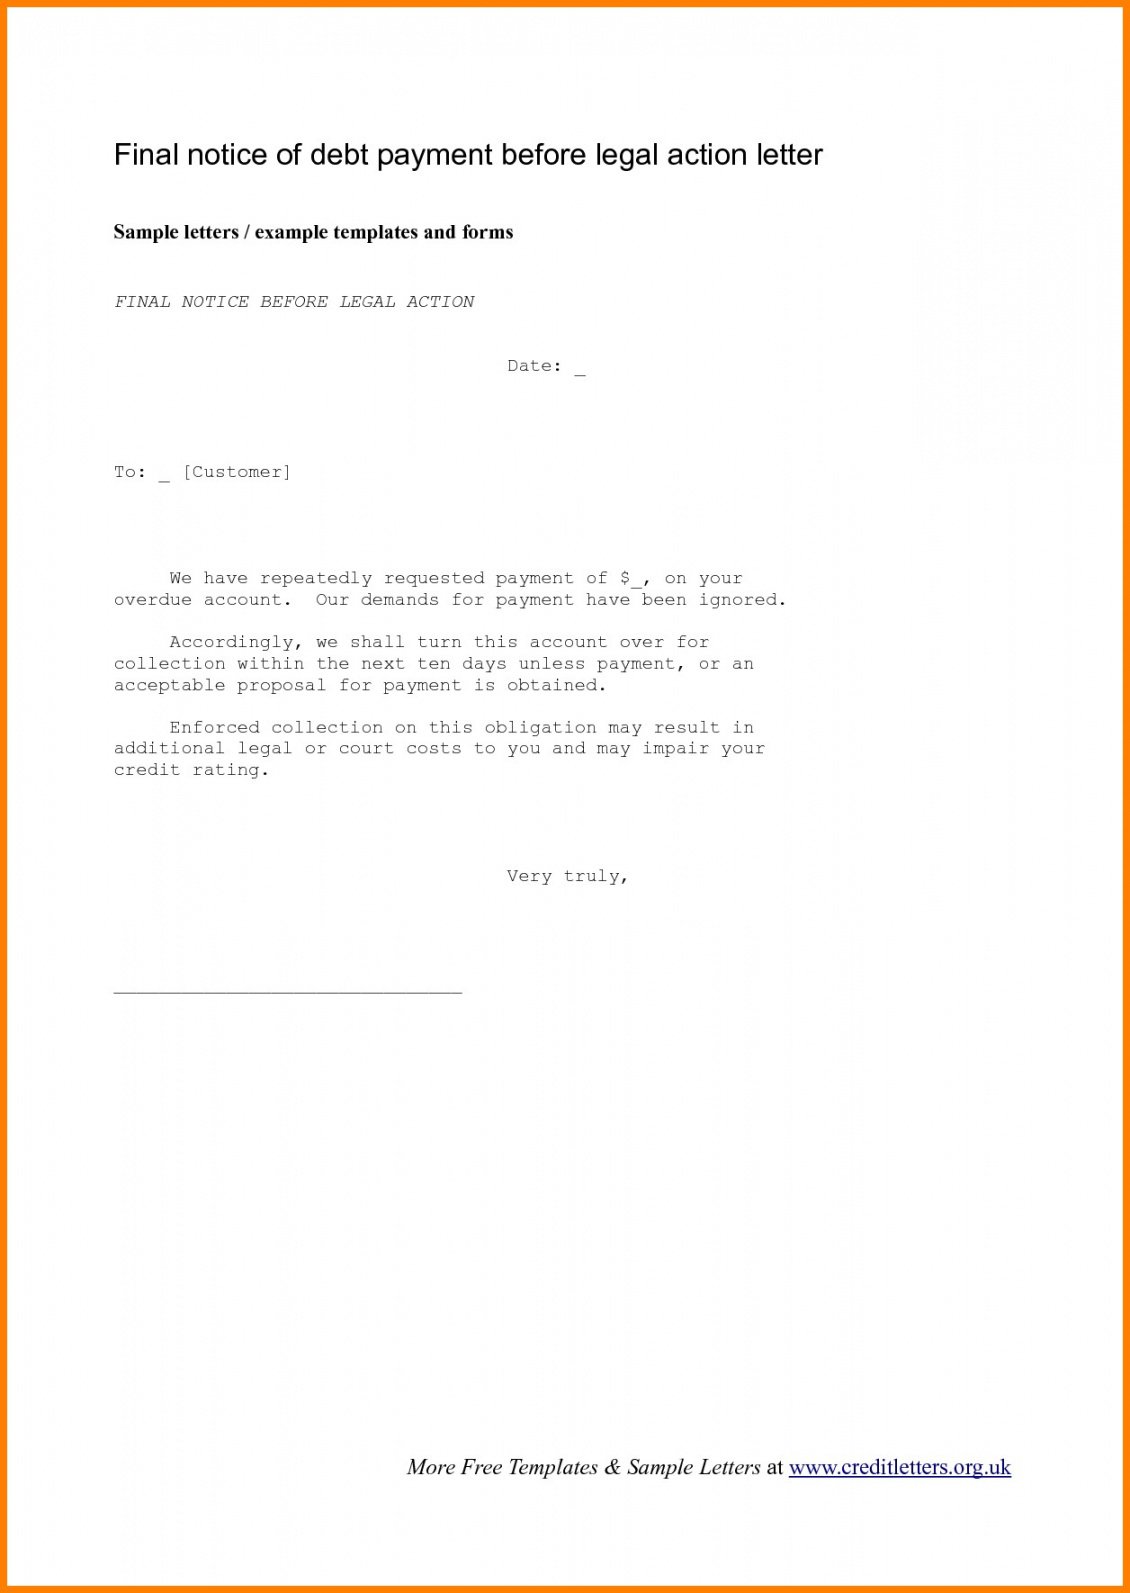 Final Notice Before Legal Action Letter Template Uk ~ Resume Letter